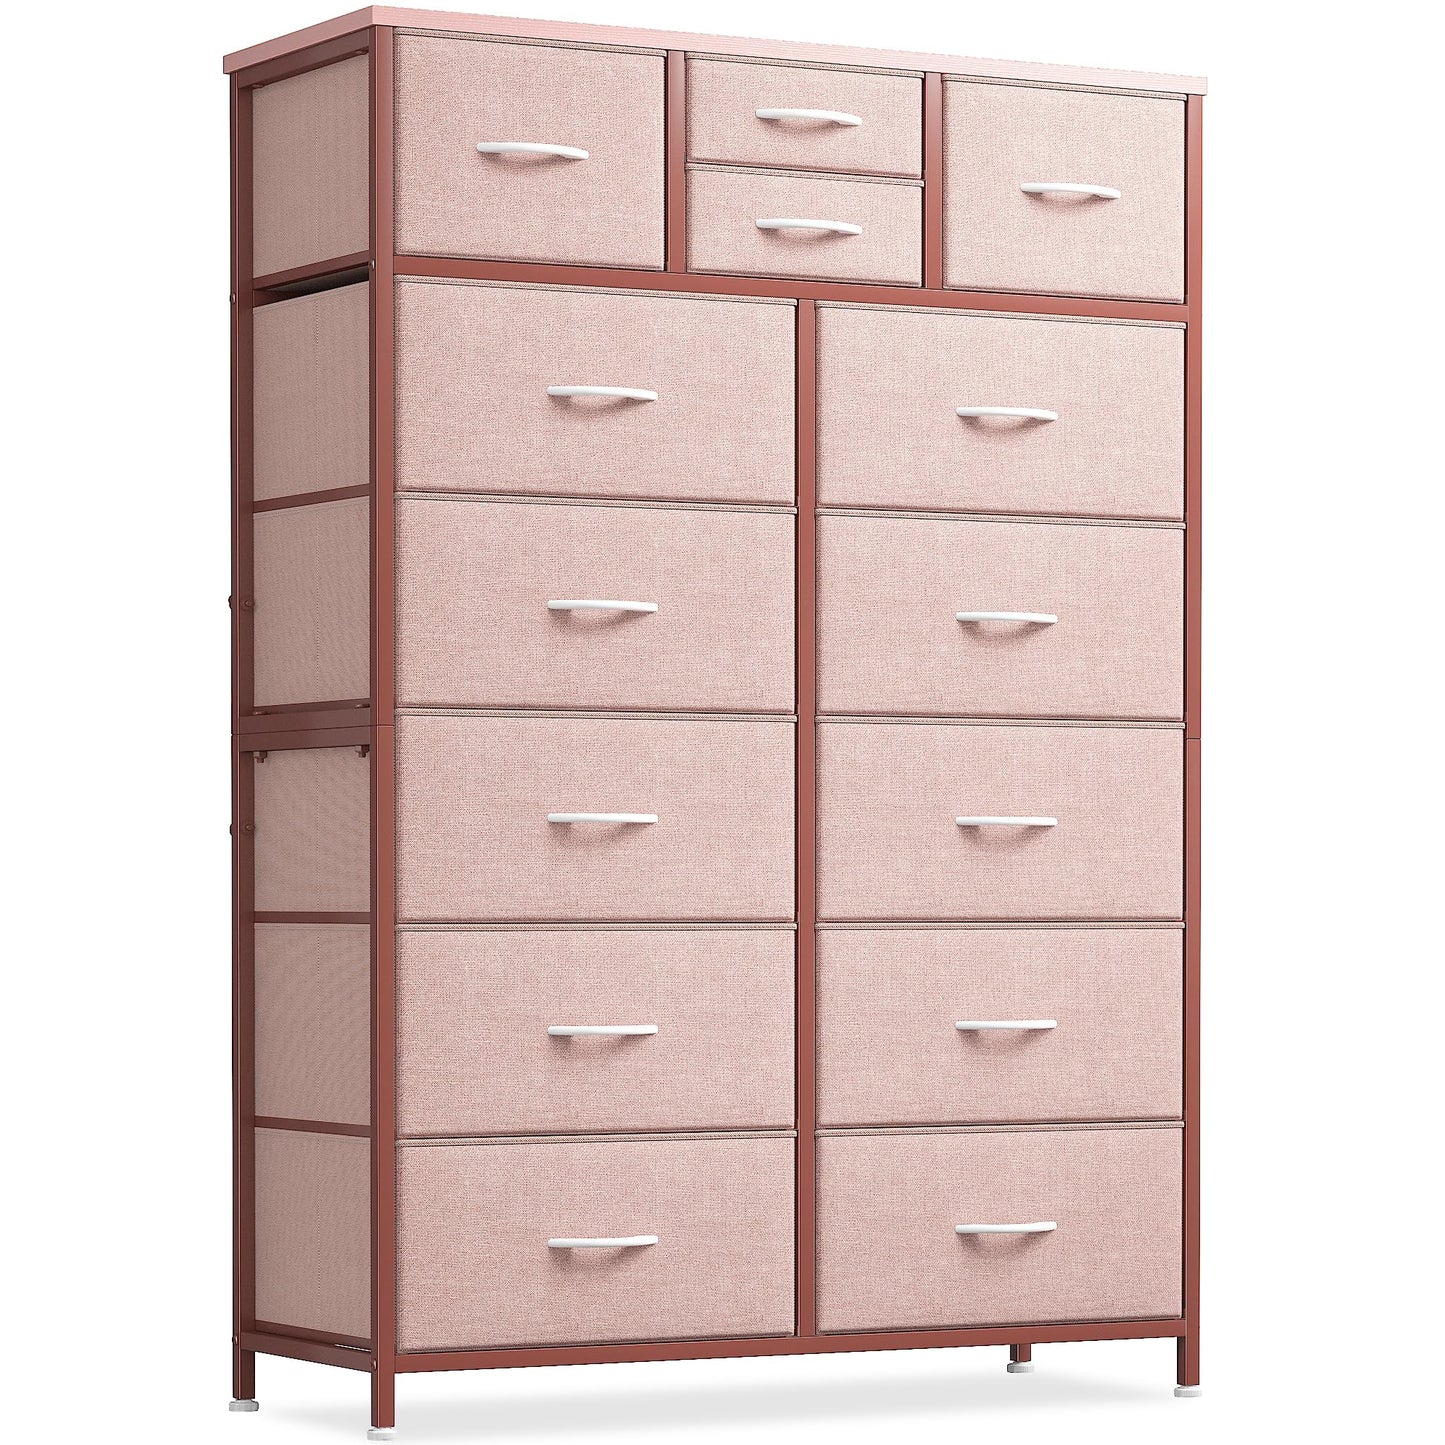 Hana Exports White Dresser for Bedroom with 14 Drawers, Tall Dressers for Bedroom with Wooden Top and Metal Frame, Large Fabric Bedroom Dressers & Chest of Drawers for Bedroom, Closet, Livingroom, White